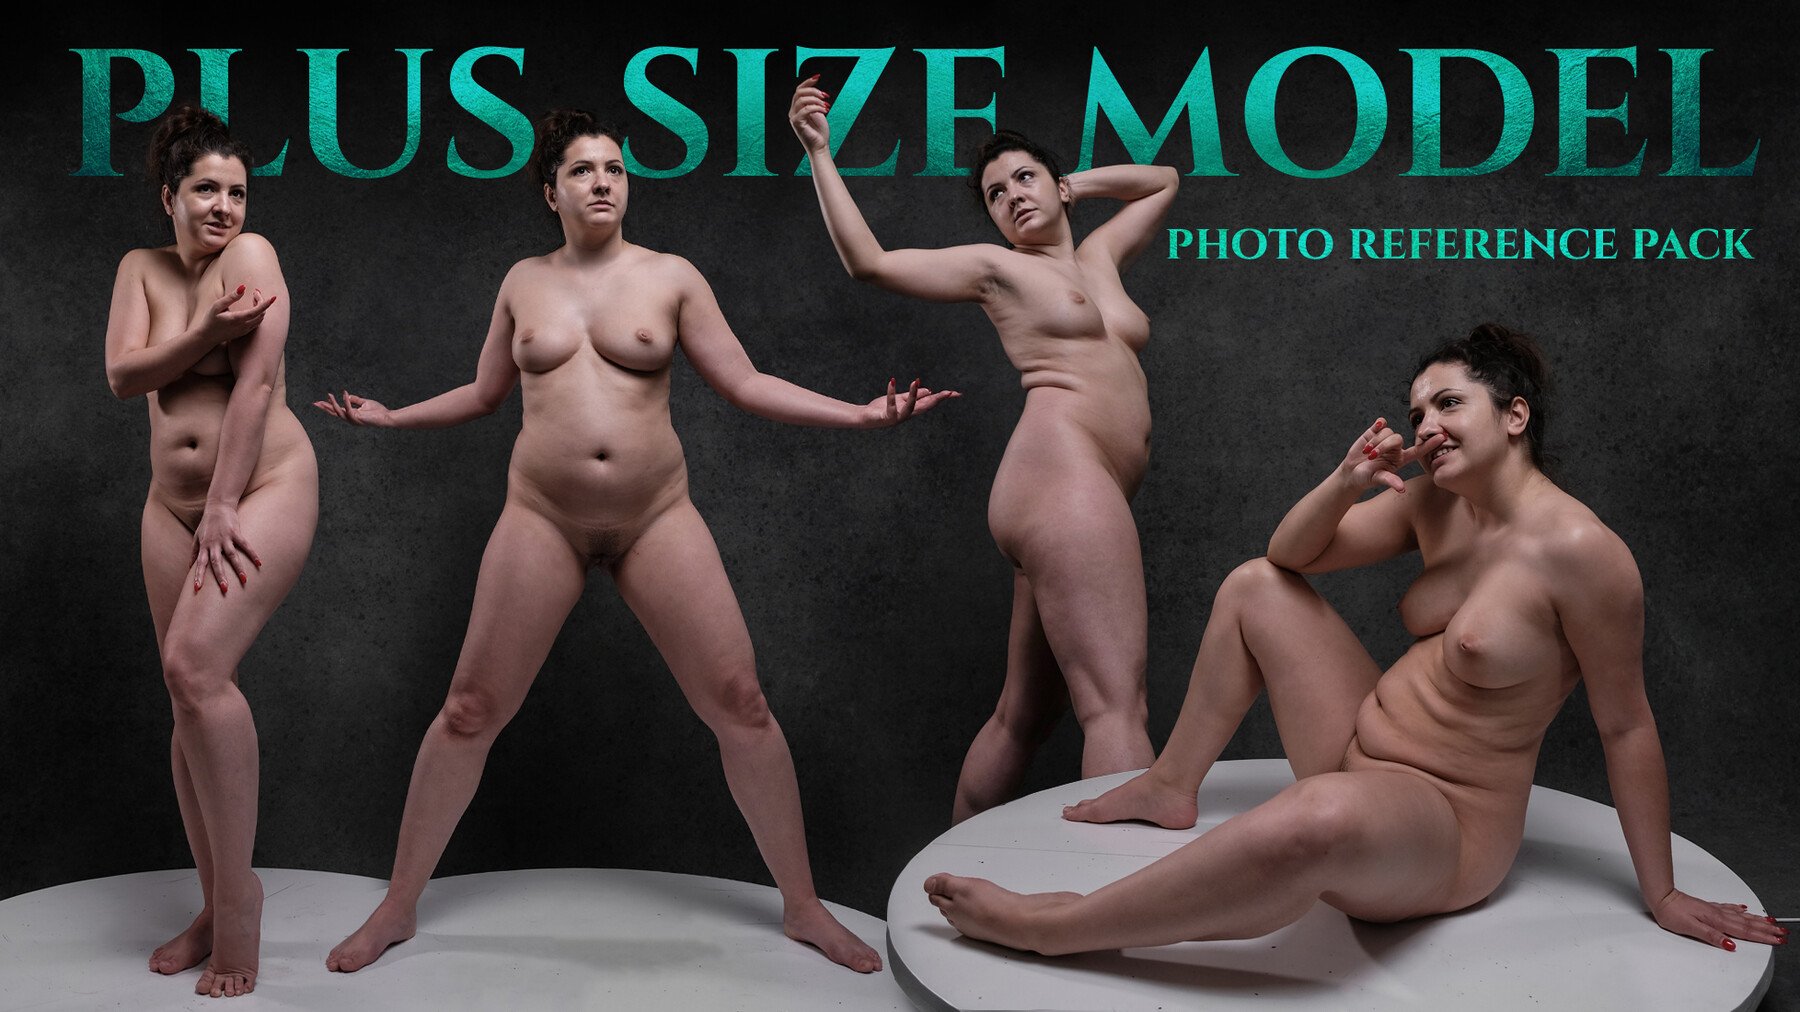 cyndi koh recommends Plus Size Nude Modles